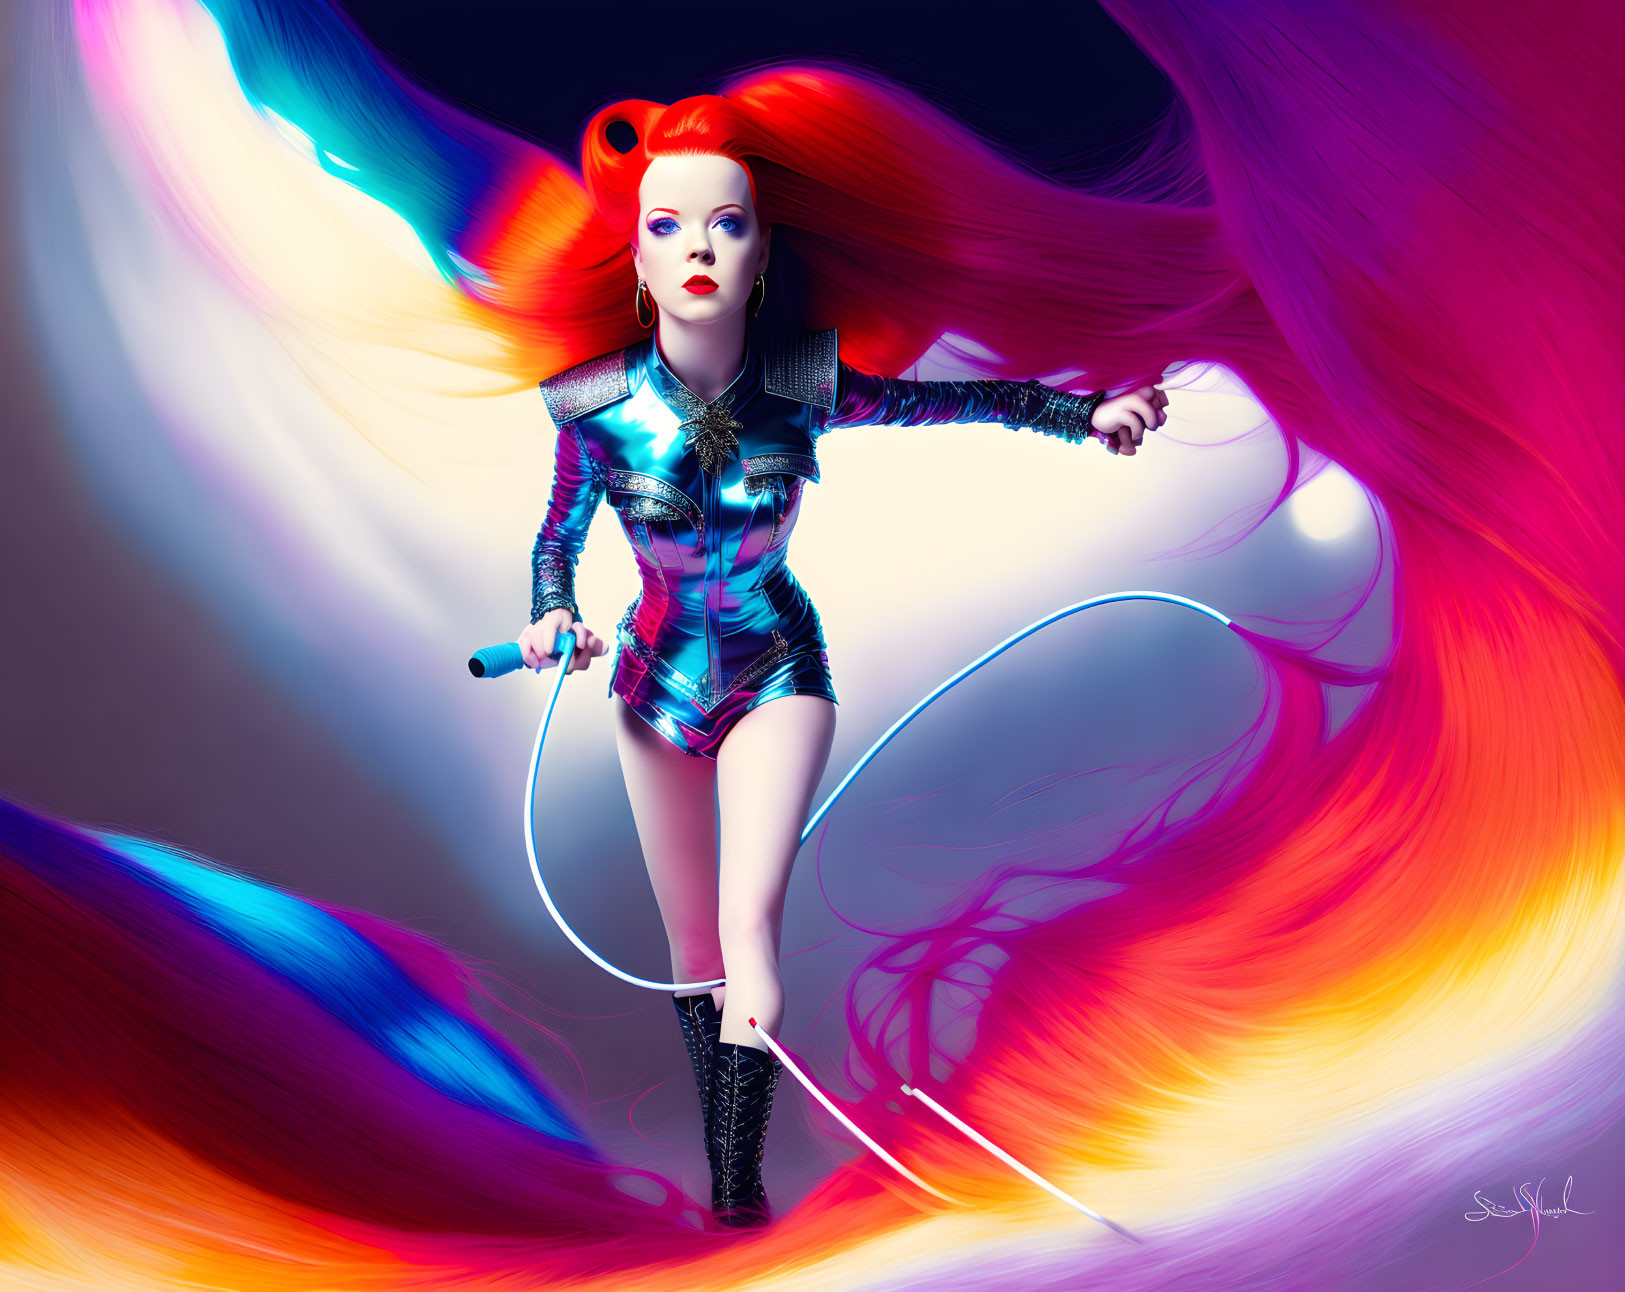 Dynamic red-haired woman in futuristic outfit sings amidst abstract swirl of blue and pink.